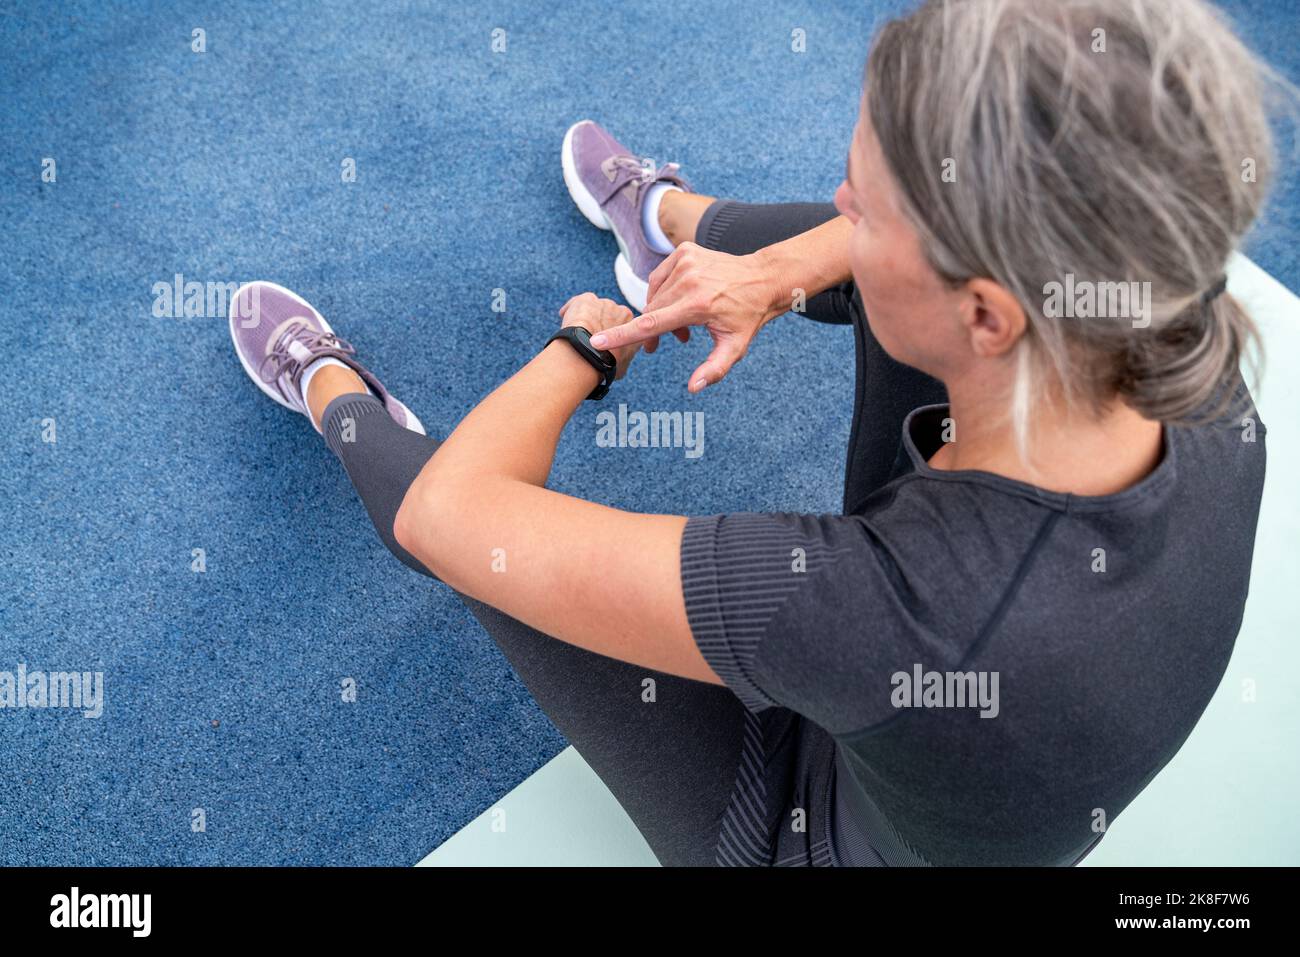 Mature woman checking time in smart watch sitting on exercise mat Stock Photo